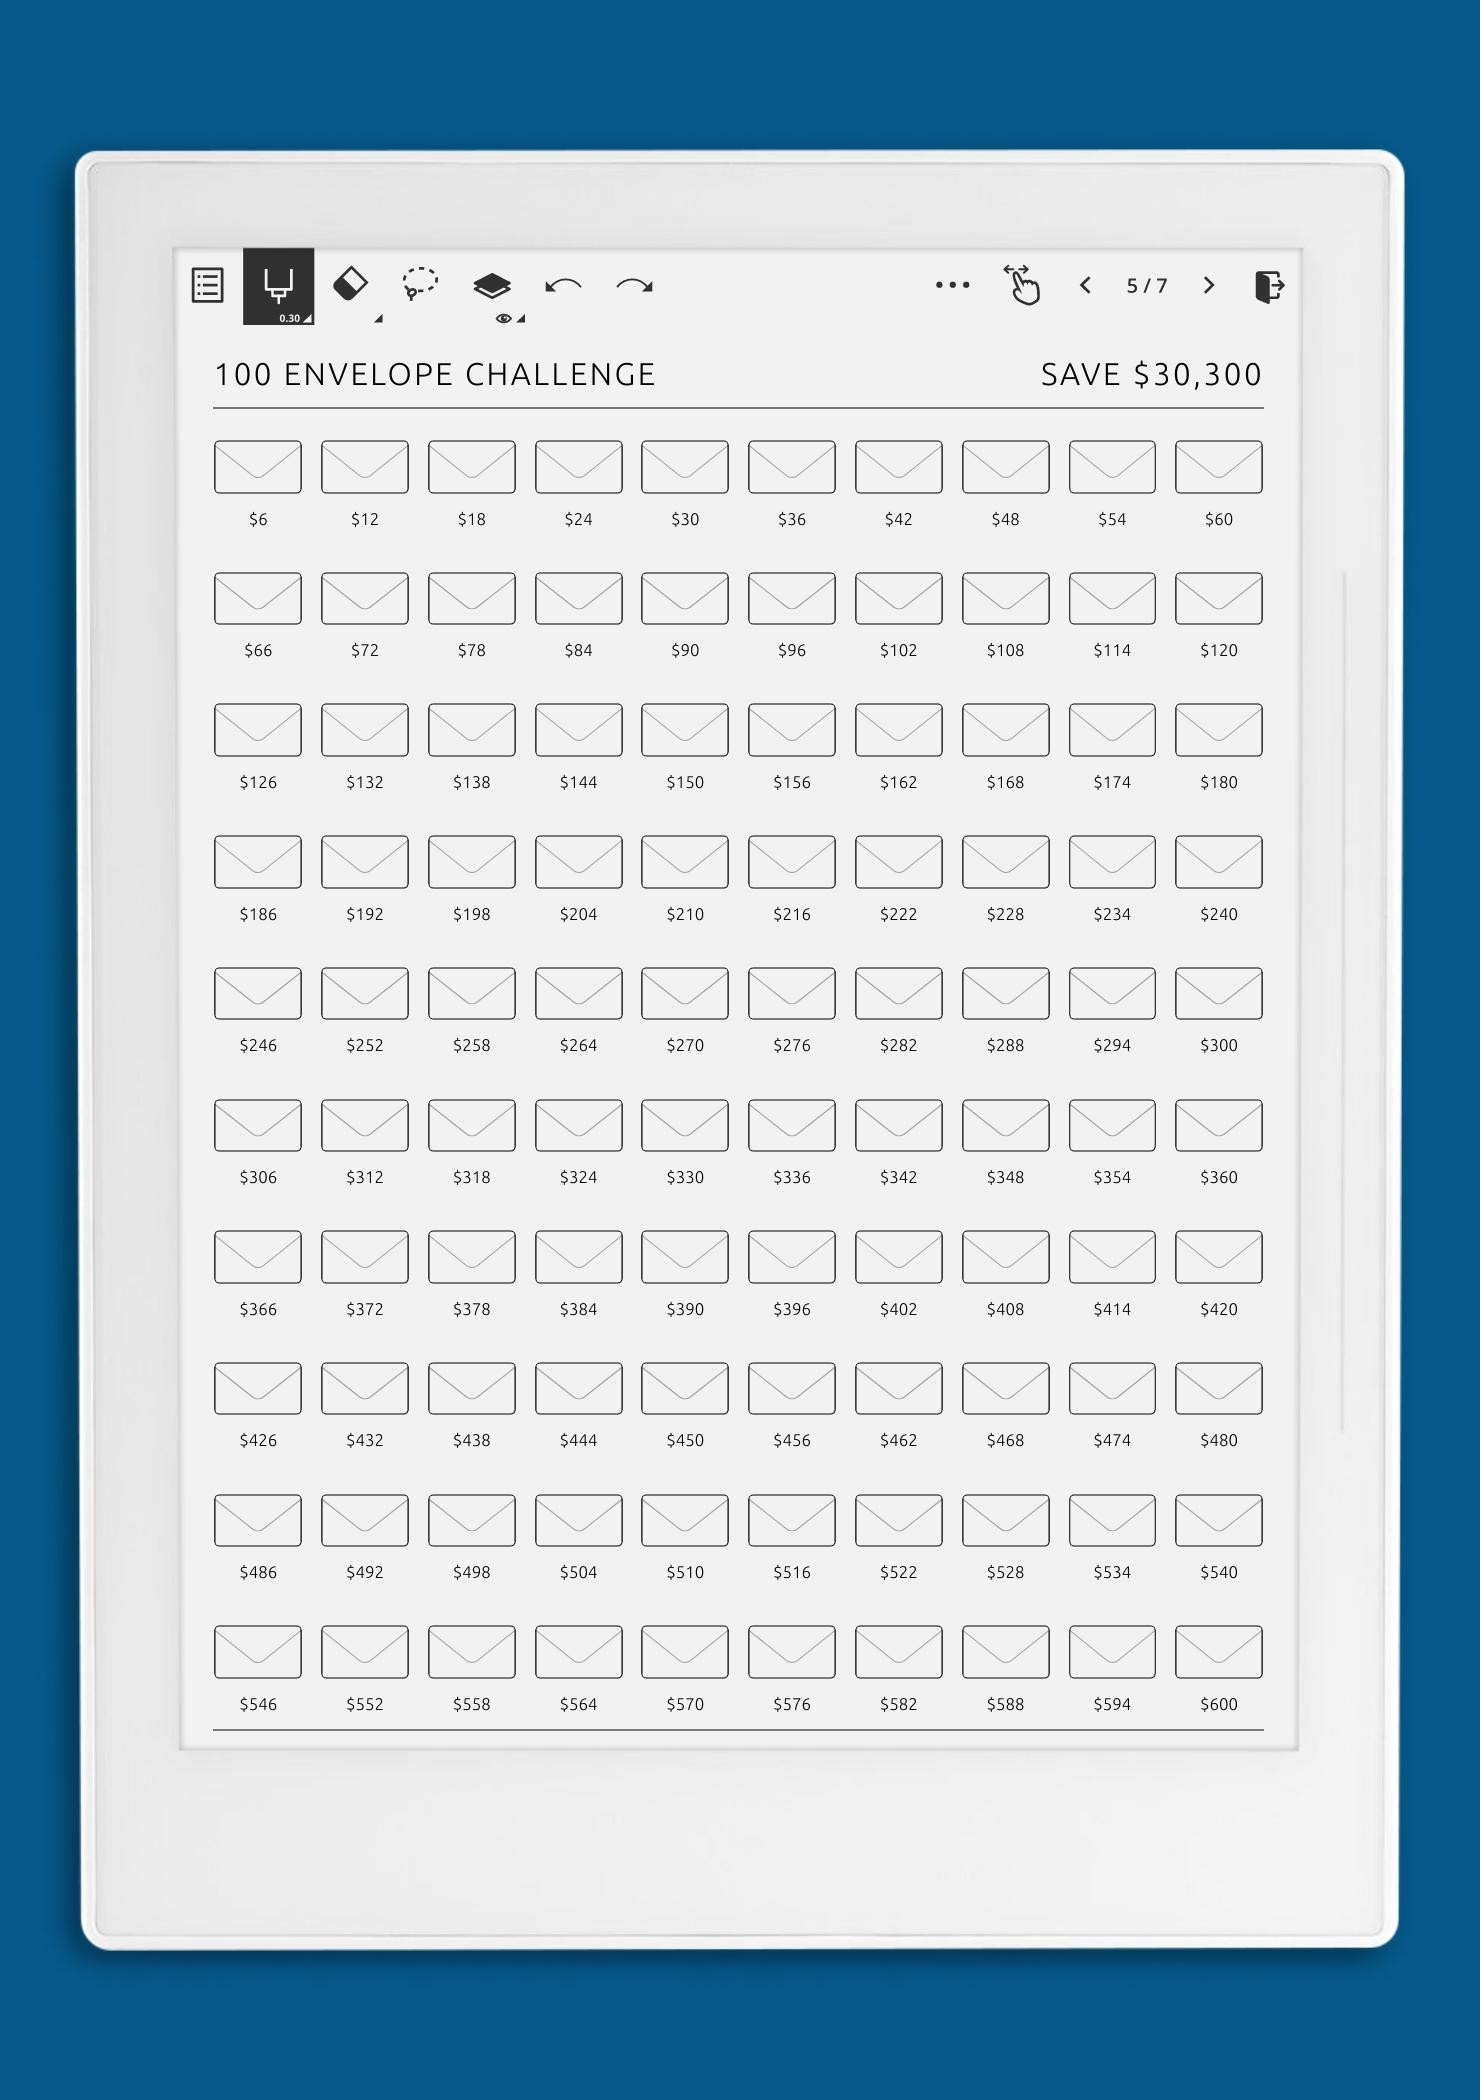 100 French Challenge Envelopes Printable Challenge Sheet A6/A5/A4, PDF to  Download, Budget Envelopes, Budget Challenge -  New Zealand